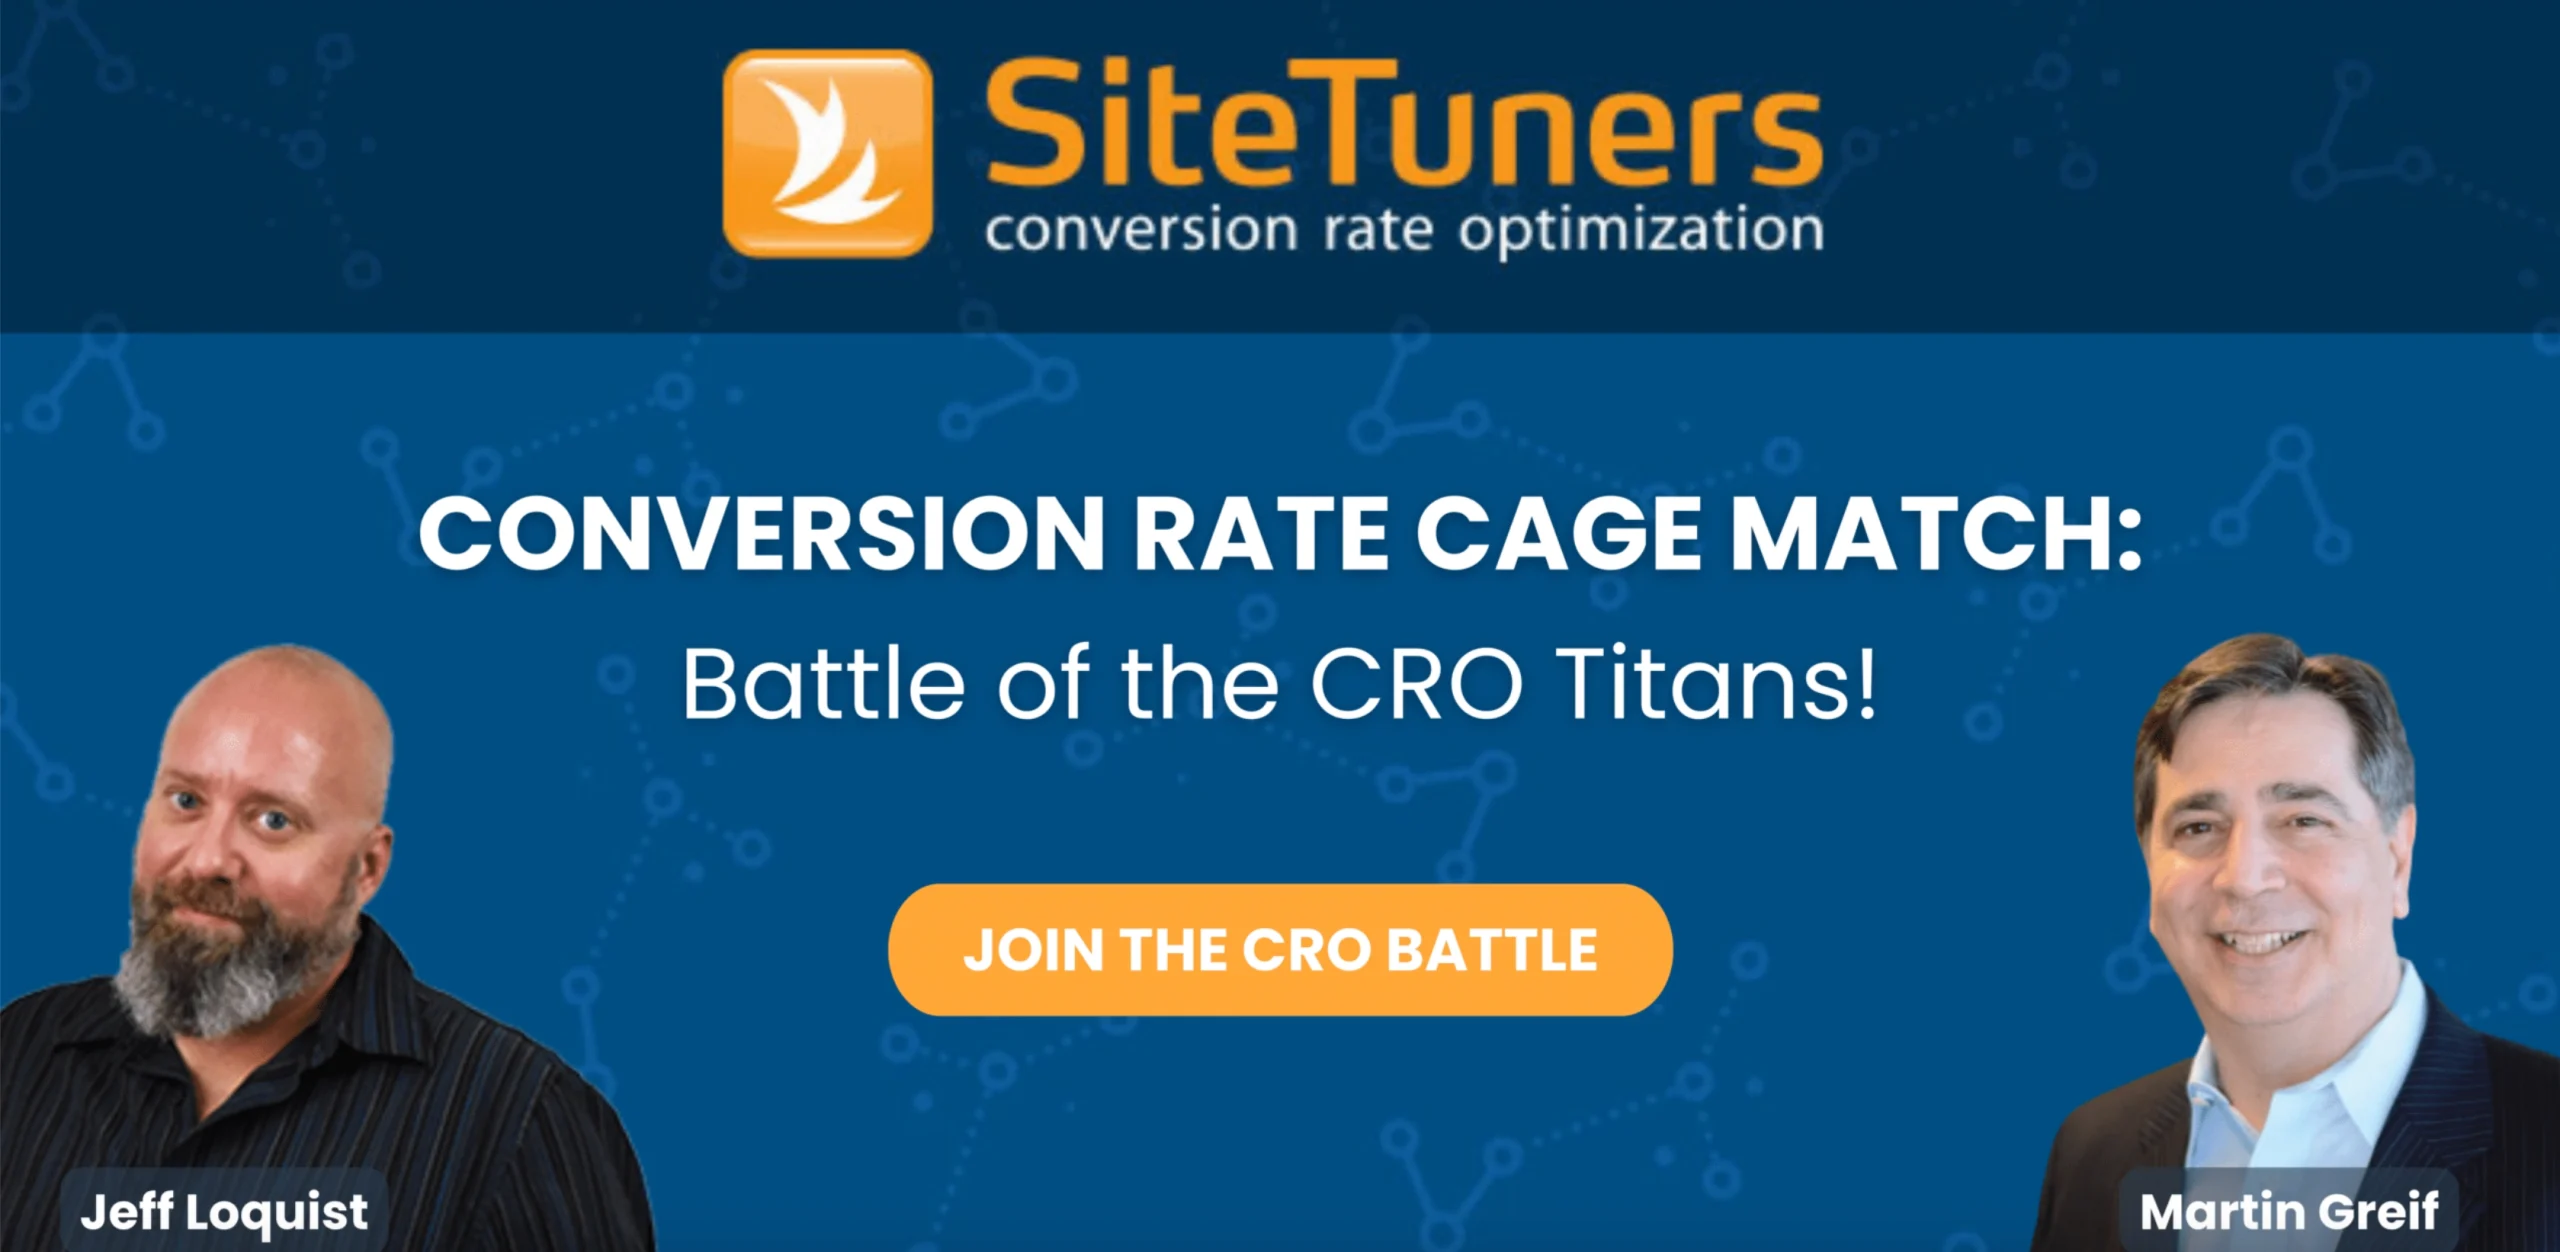 google analytics certified experts in conversion rate optimization